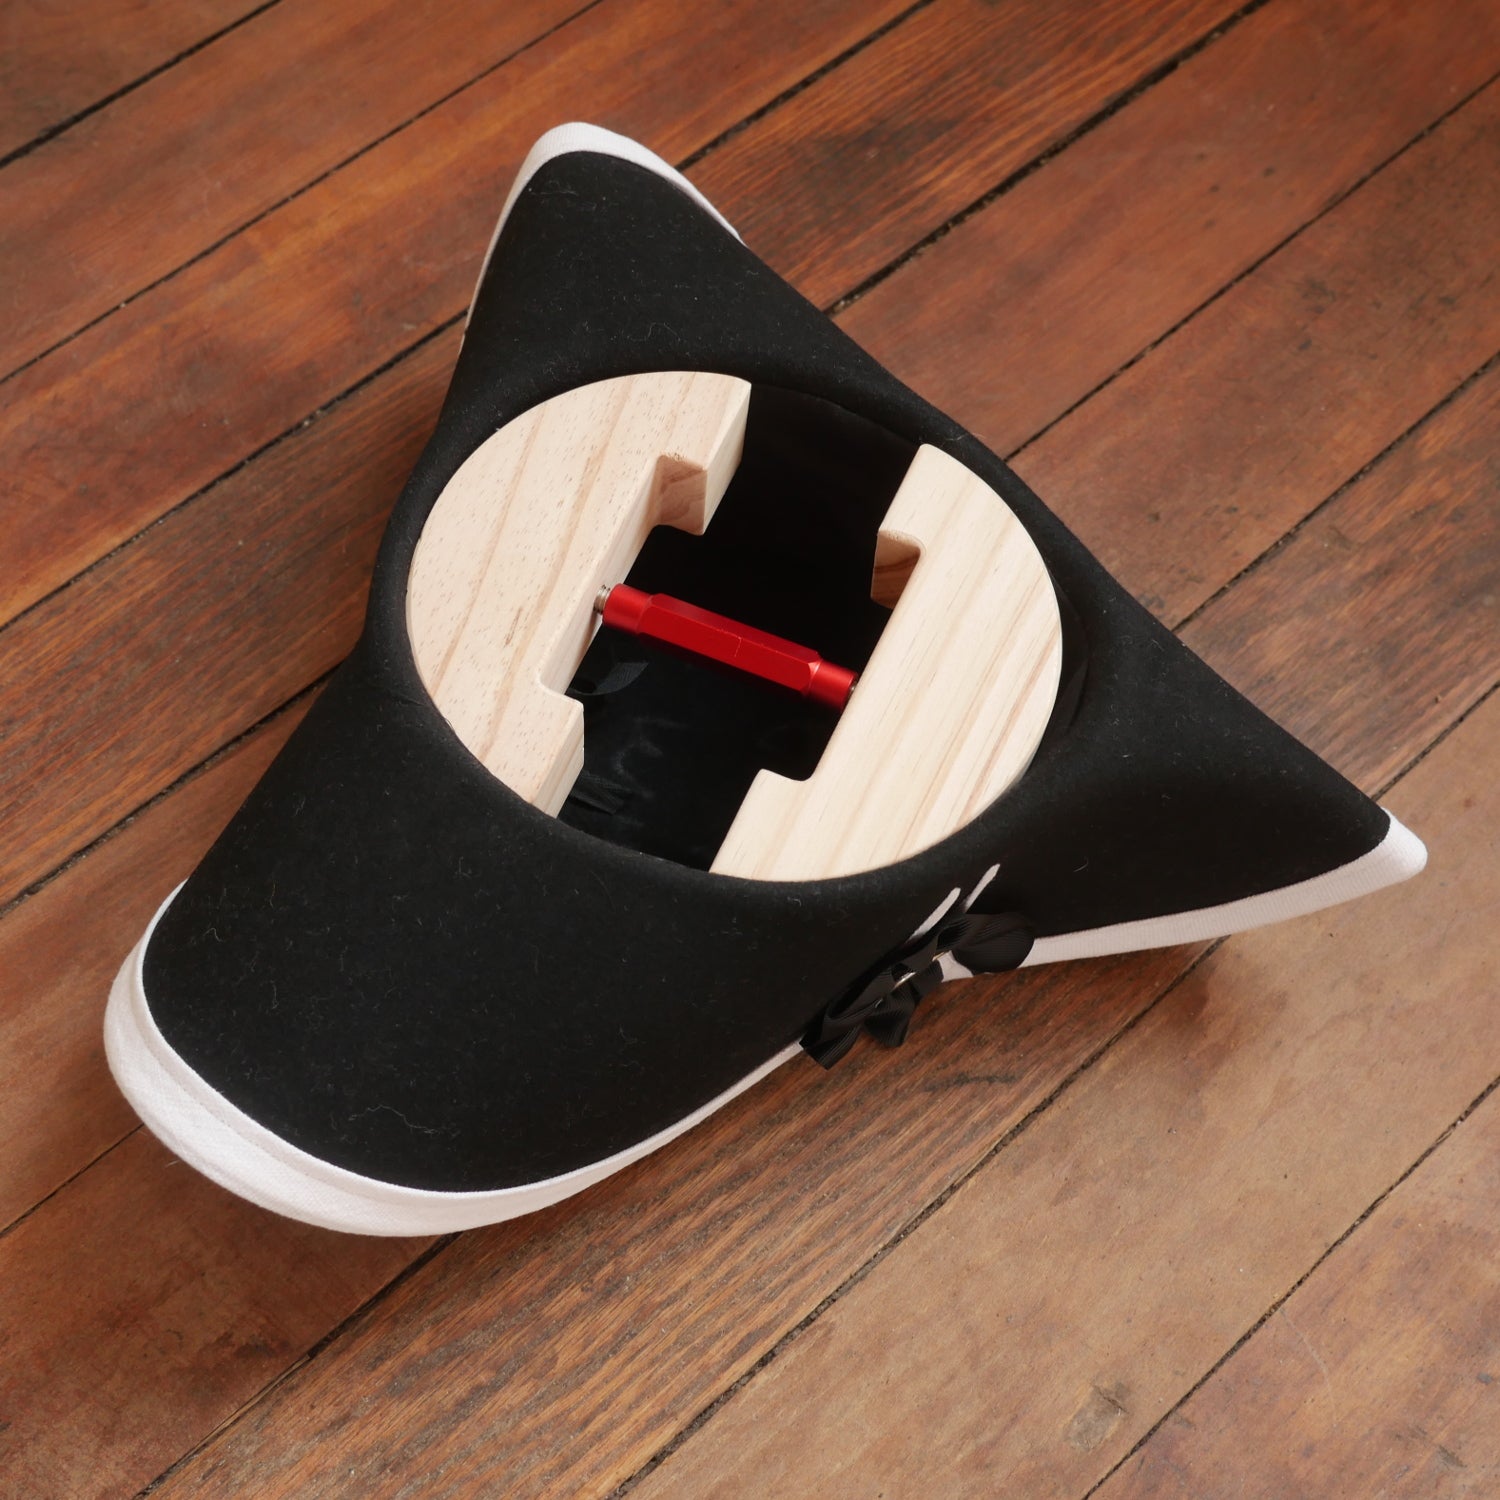 Hat Stretcher - New - For hat sizes 6 3/4 to 8 1/2 - The Heaviest Duty  Stretcher